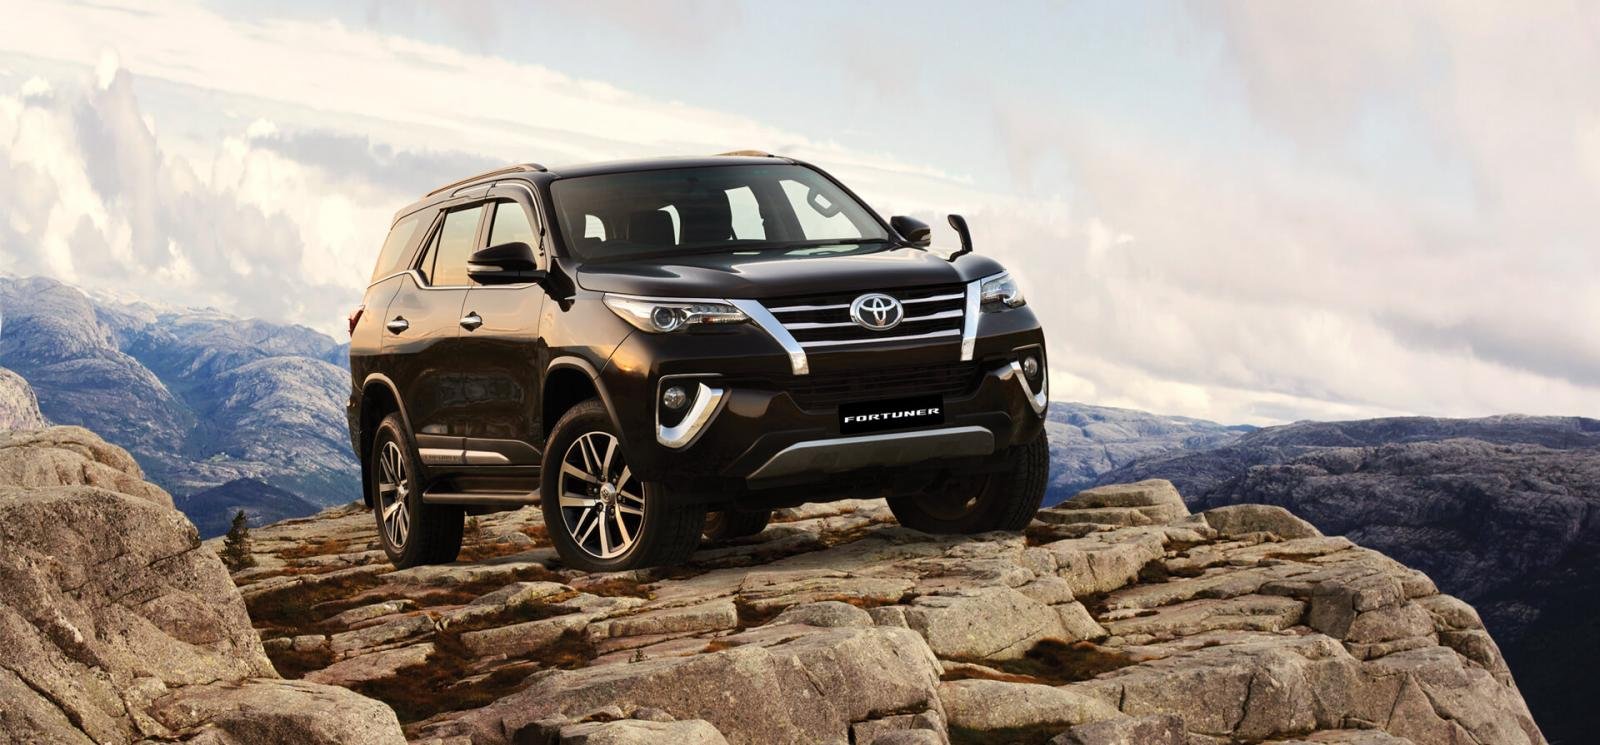 2020 BS-6 Toyota Fortuner - performance